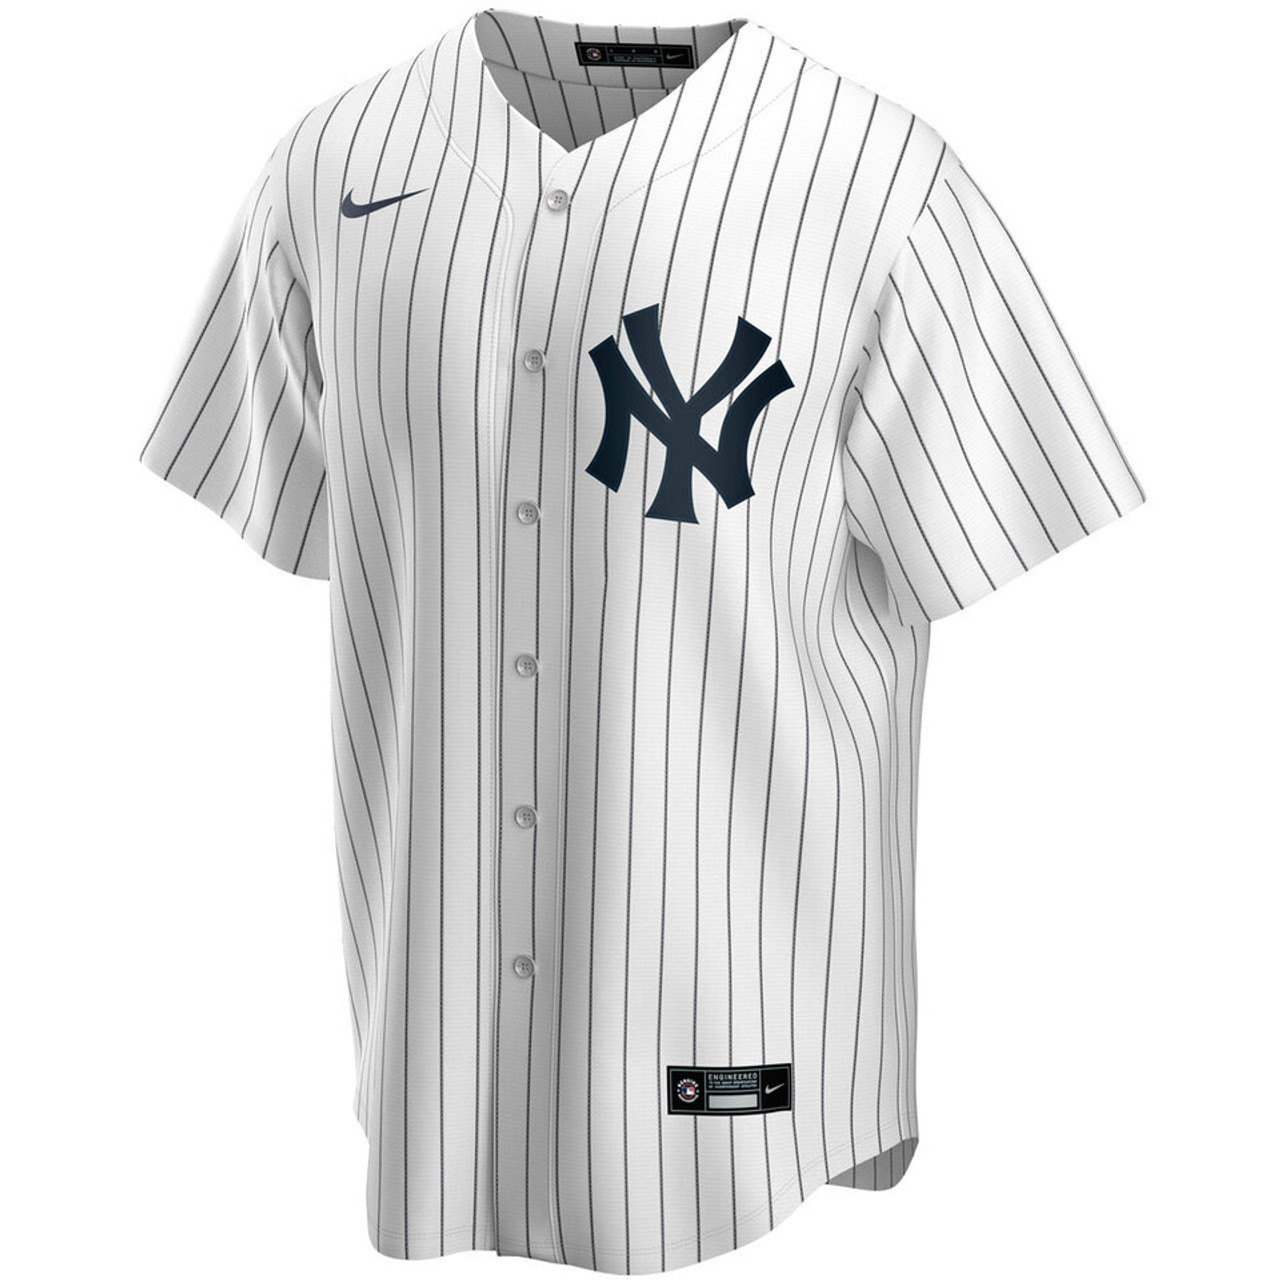 Jake Bauers No Name Road Jersey - NY Yankees Number Only Replica Adult Road  Jersey